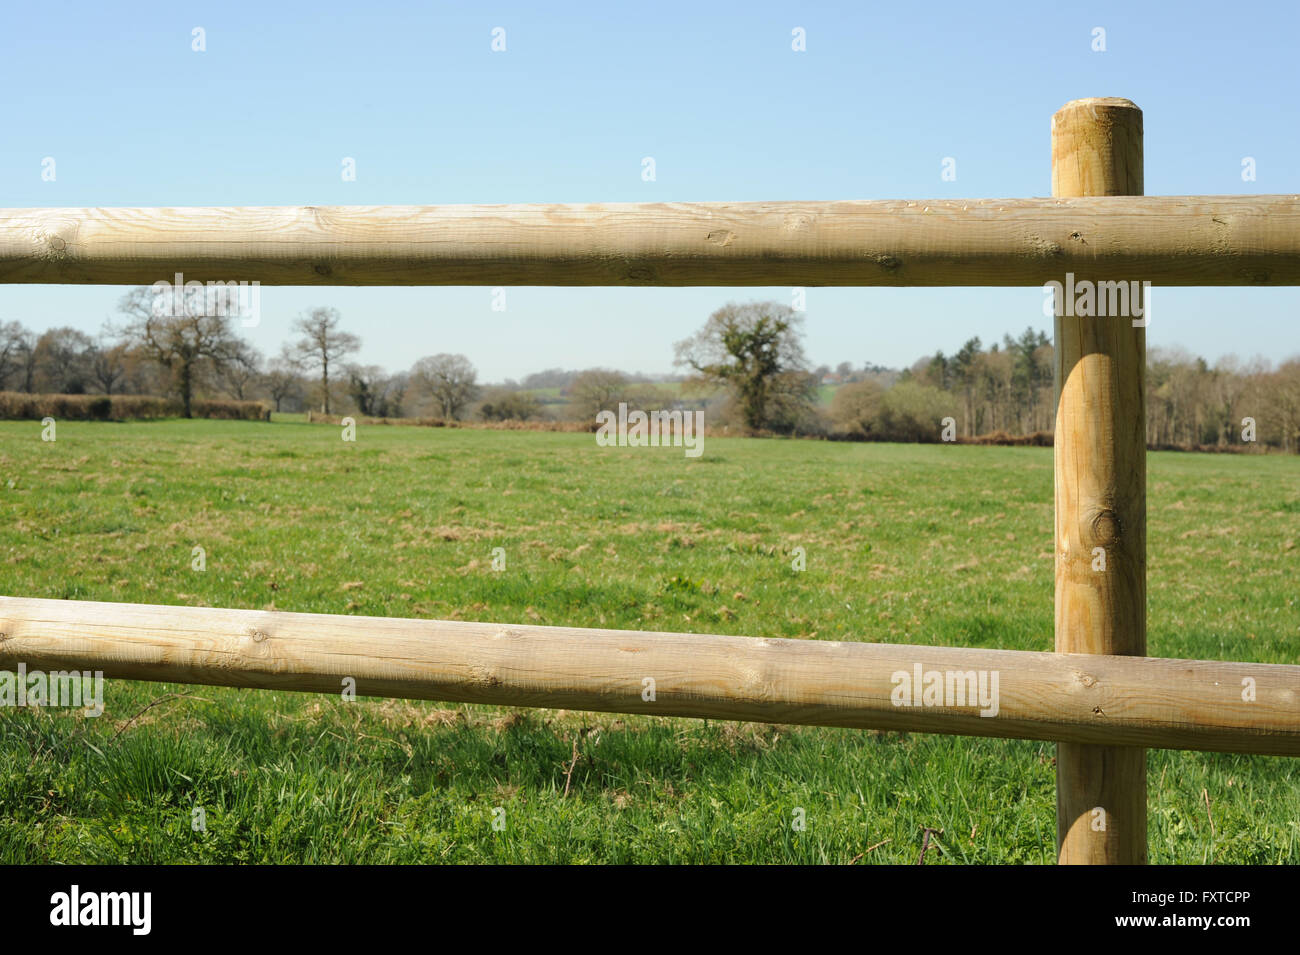 Photograph of a wooden post and rail with field and grass behind Stock Photo